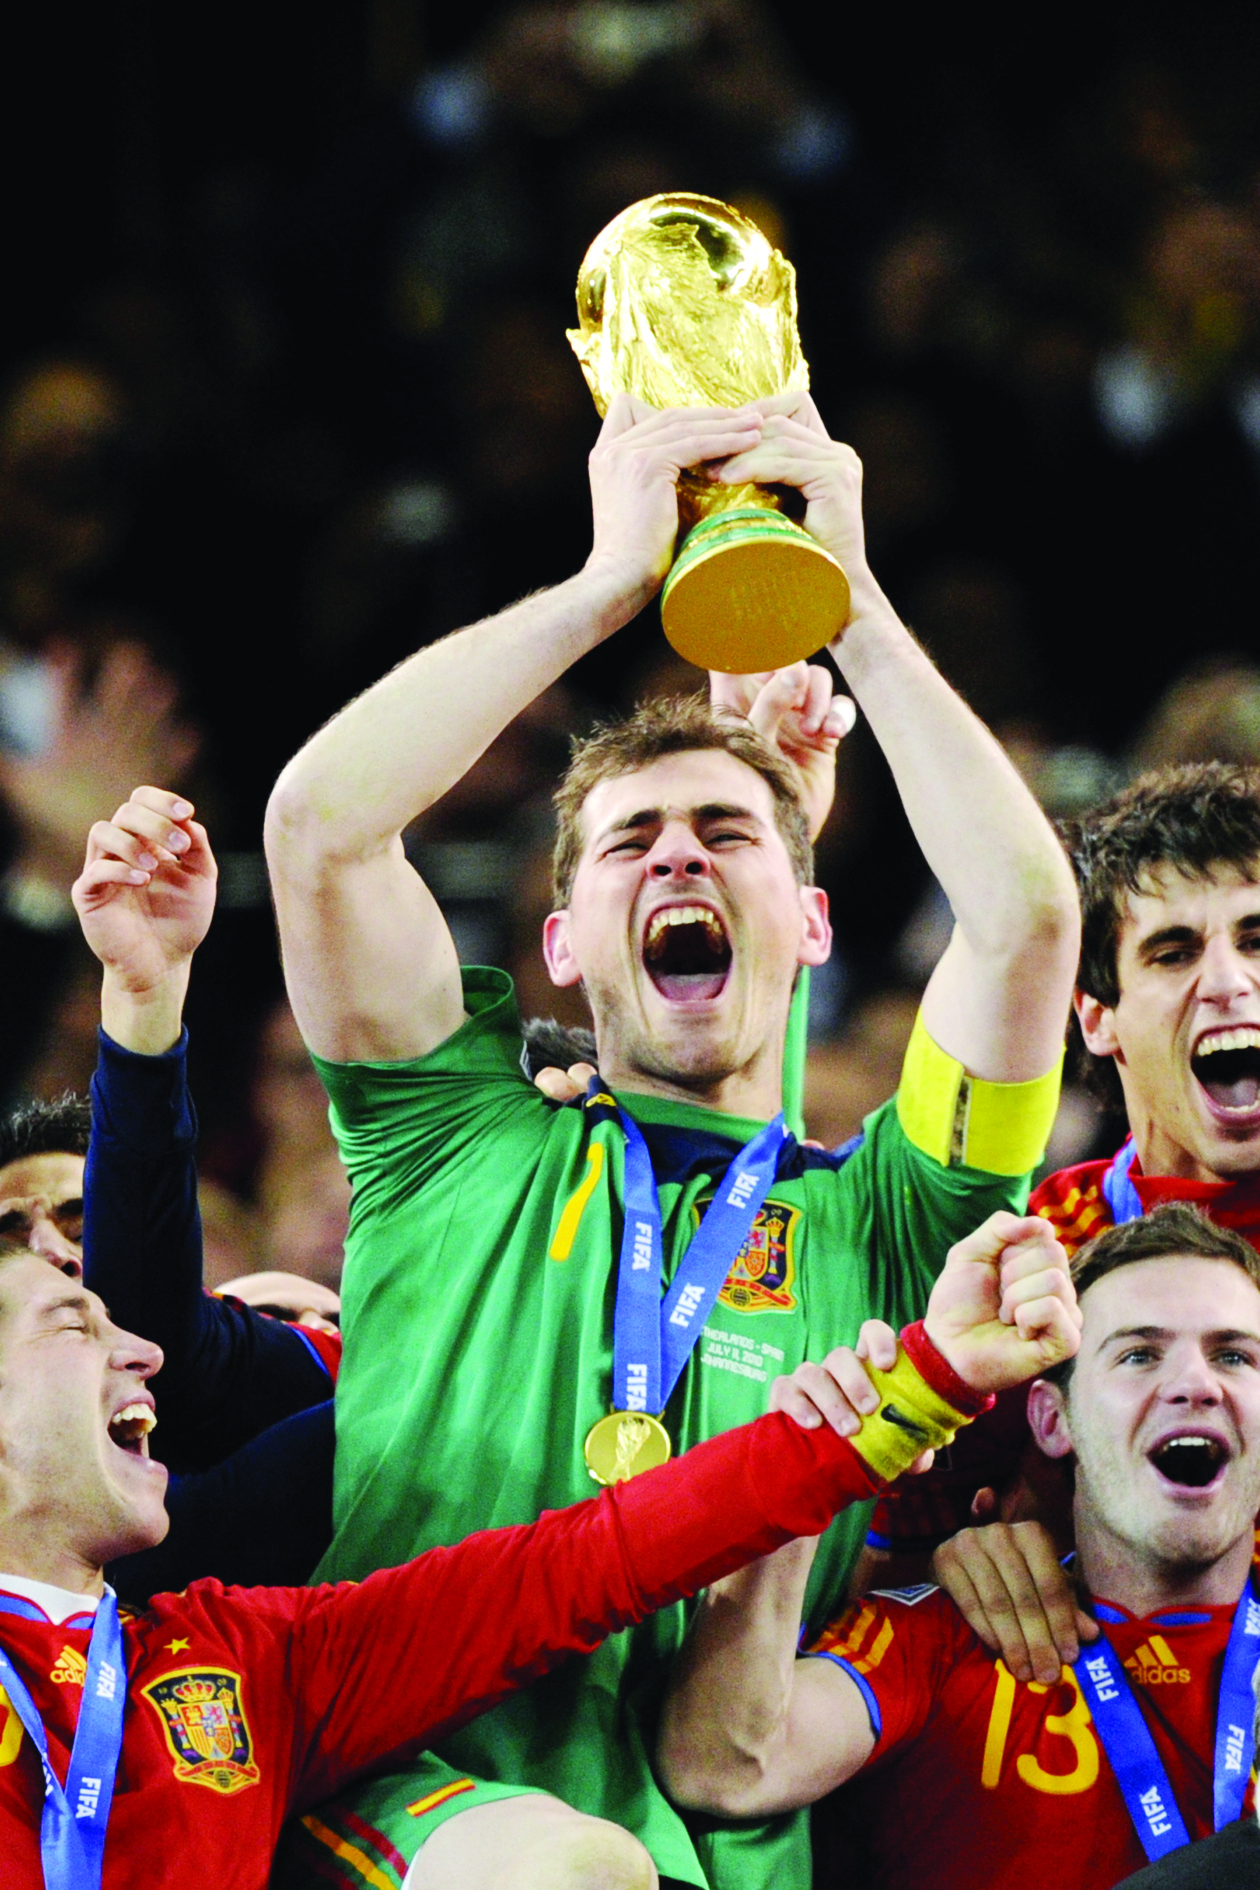 (FILES) In this file photo taken on July 11, 2010 Spain's goalkeeper Iker Casillas  celebrates with the trophy following the 2010 World Cup football final between the Netherlands and Spain on July 11, 2010 at Soccer City stadium in Soweto, suburban Johannesburg. - Spain's World Cup-winning goalkeeper Iker Casillas announced his retirement on August 4, 2020, after being sidelined for more than a year with a heart problem. Casillas, 39, also won the European Championship twice with his country in a trophy-laden career which included more than 700 games for Real Madrid. (Photo by Javier SORIANO / AFP)